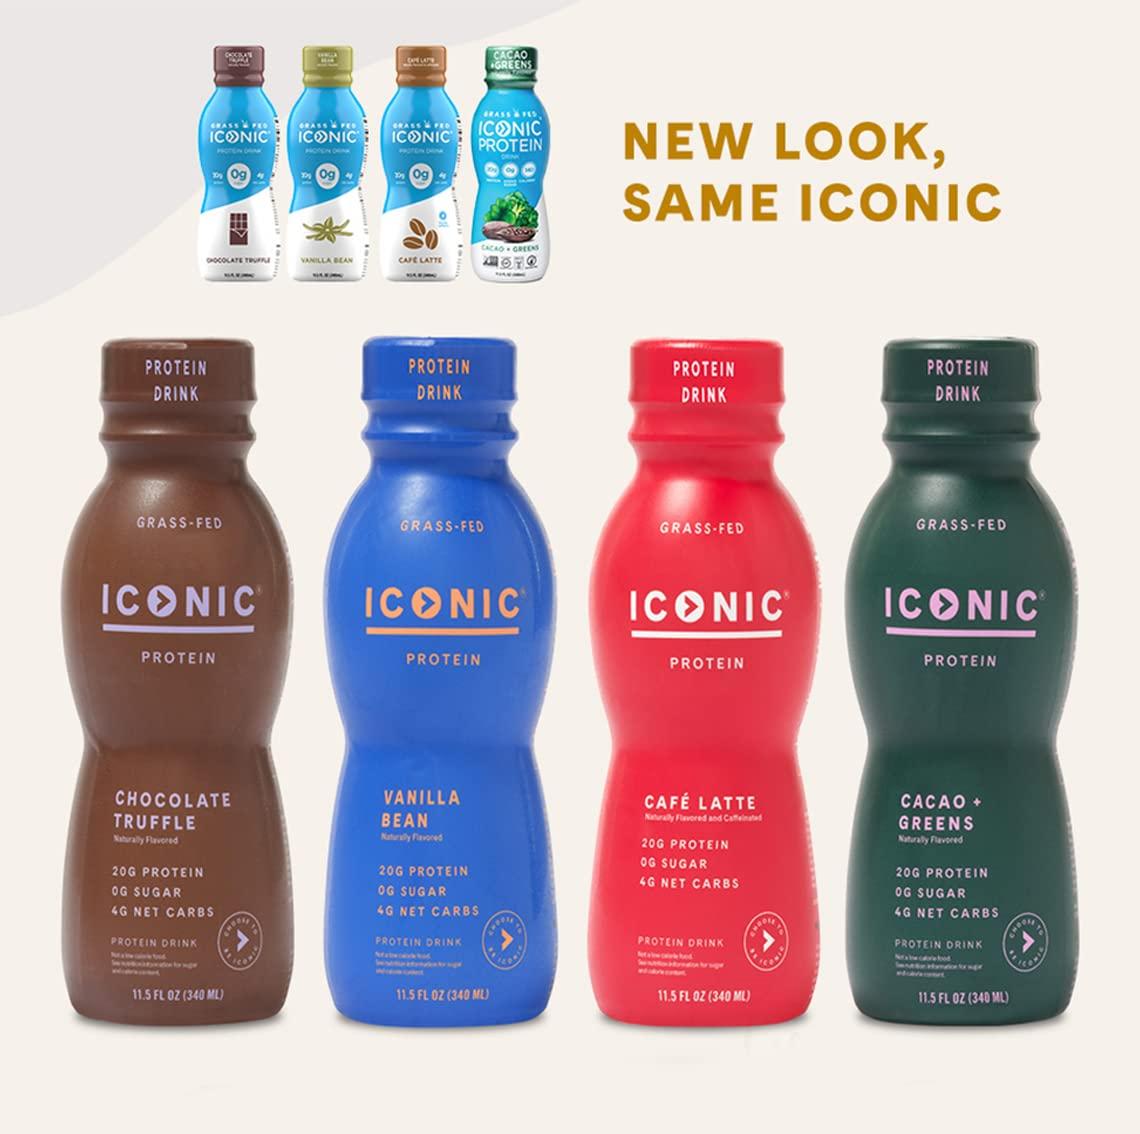 Protein drinks – ICONIC